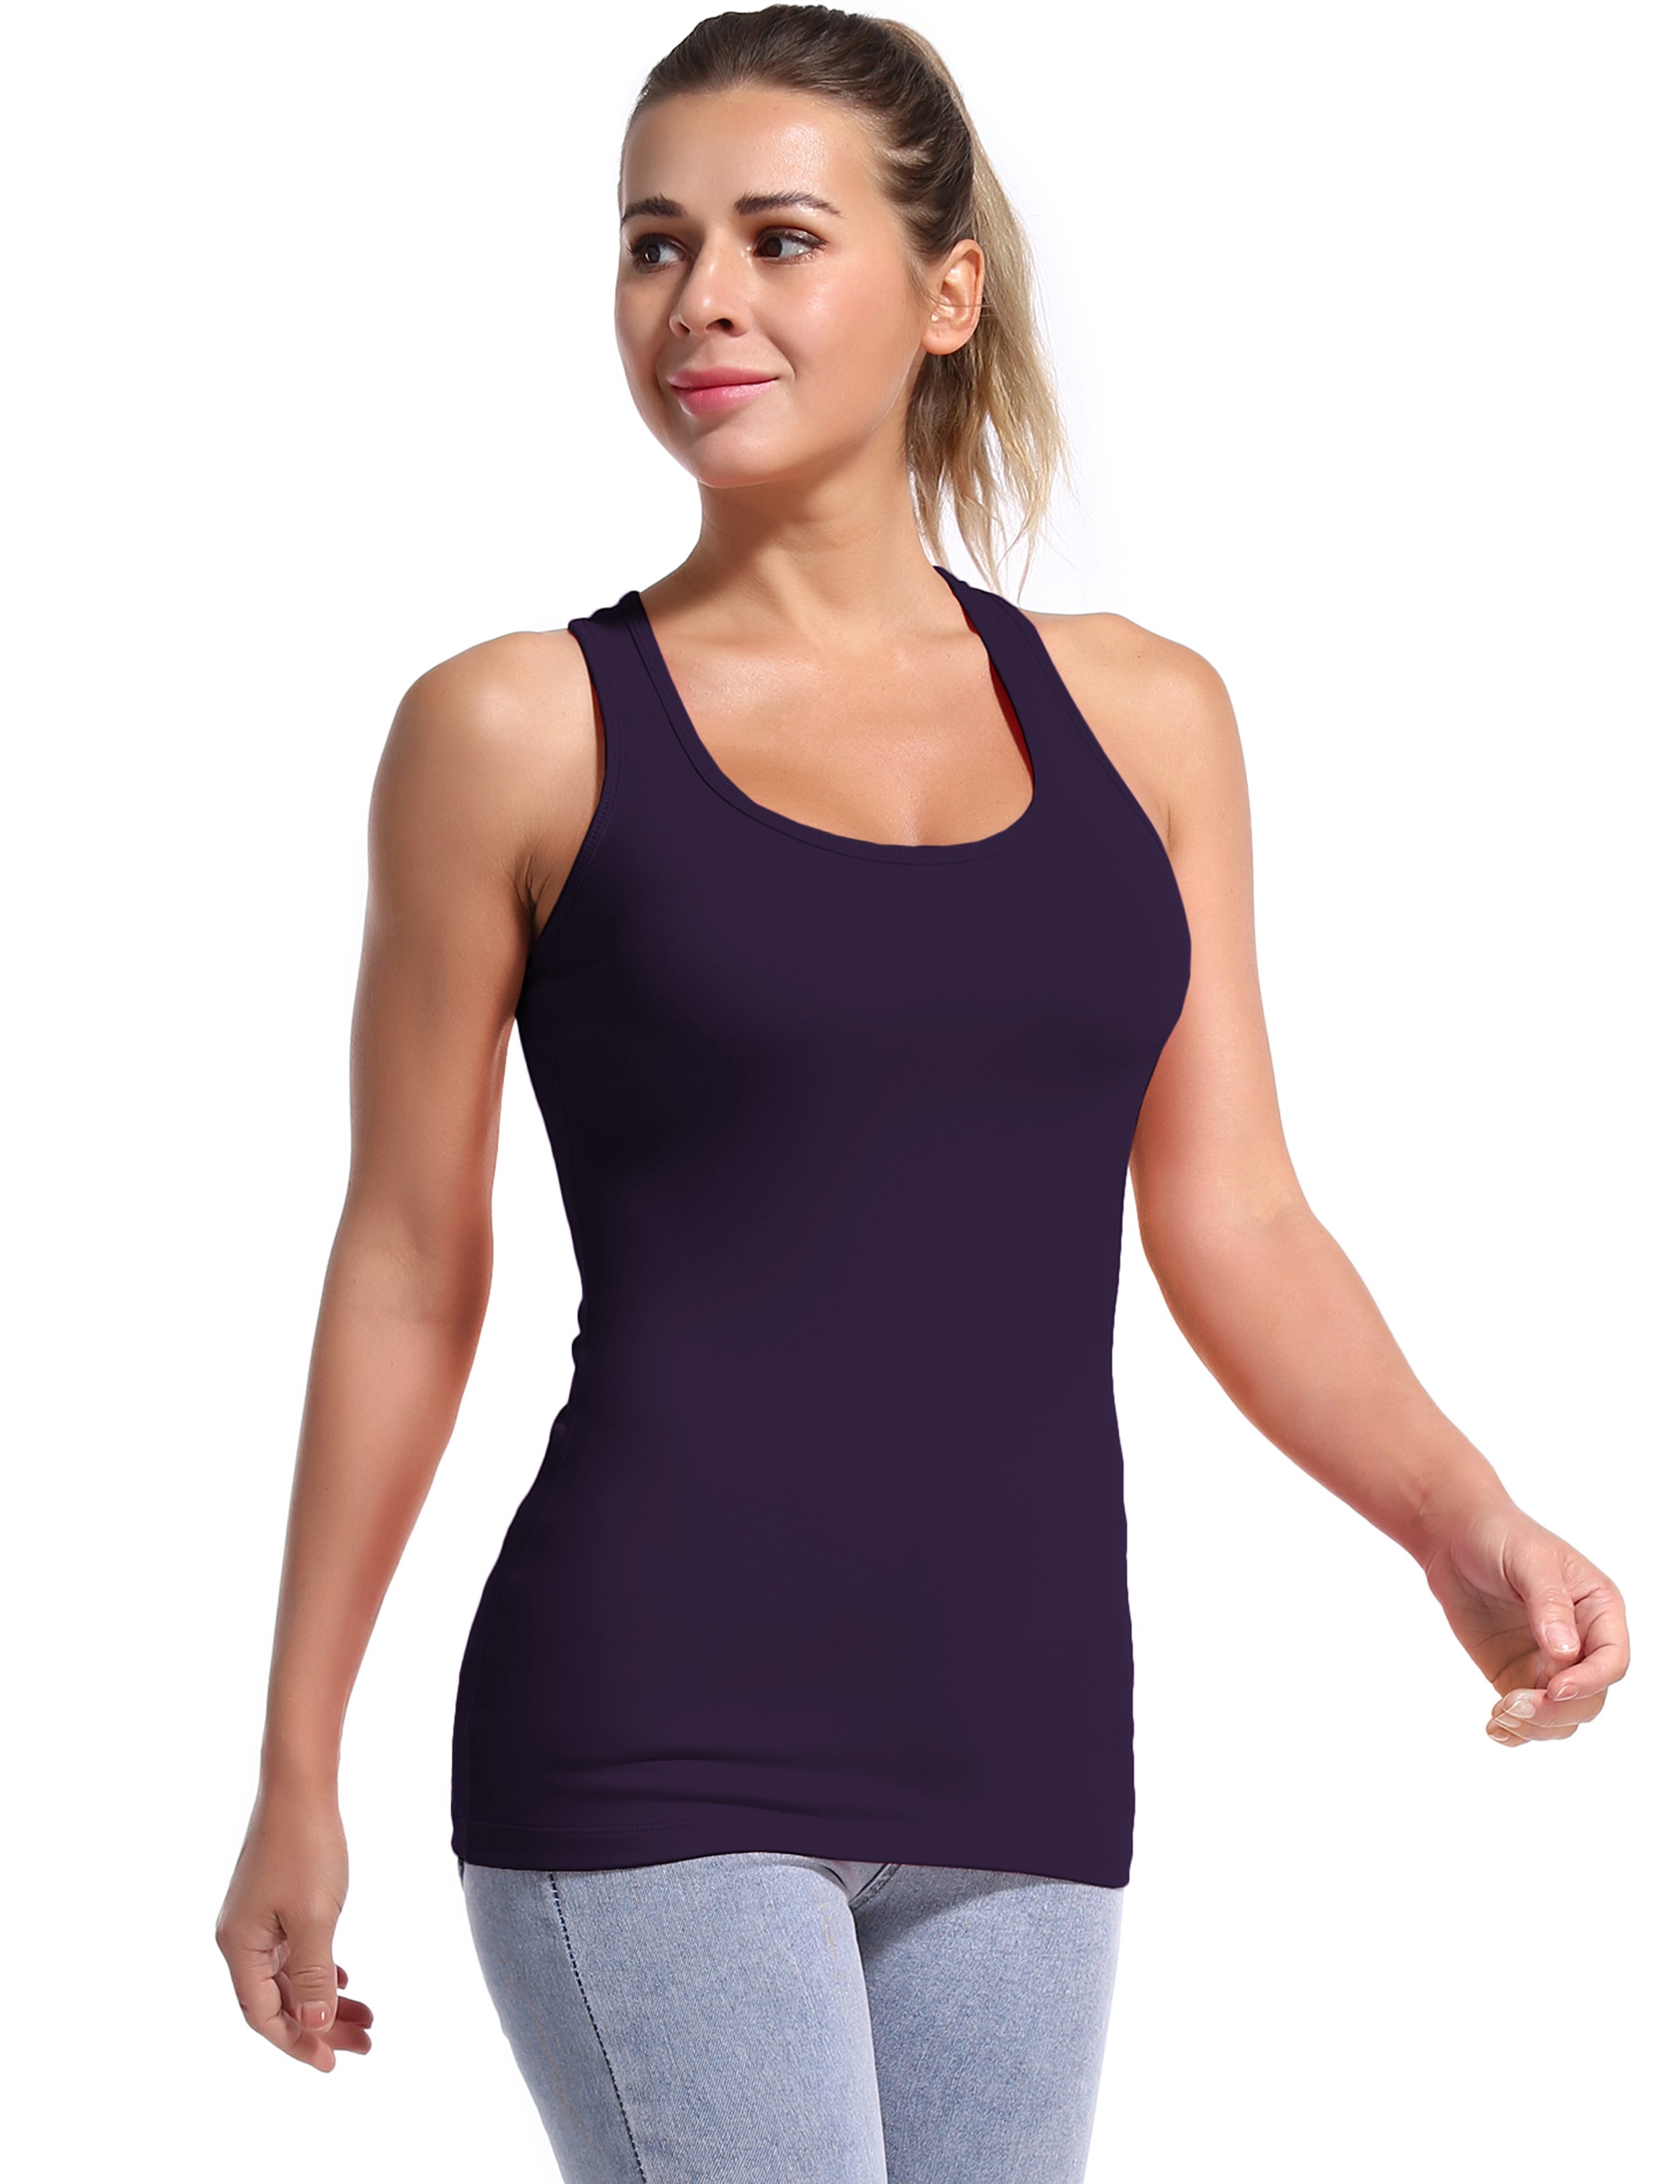 Racerback Athletic Tank Tops midnightblue 92%Nylon/8%Spandex(Cotton Soft) Designed for Yoga Tight Fit So buttery soft, it feels weightless Sweat-wicking Four-way stretch Breathable Contours your body Sits below the waistband for moderate, everyday coverage